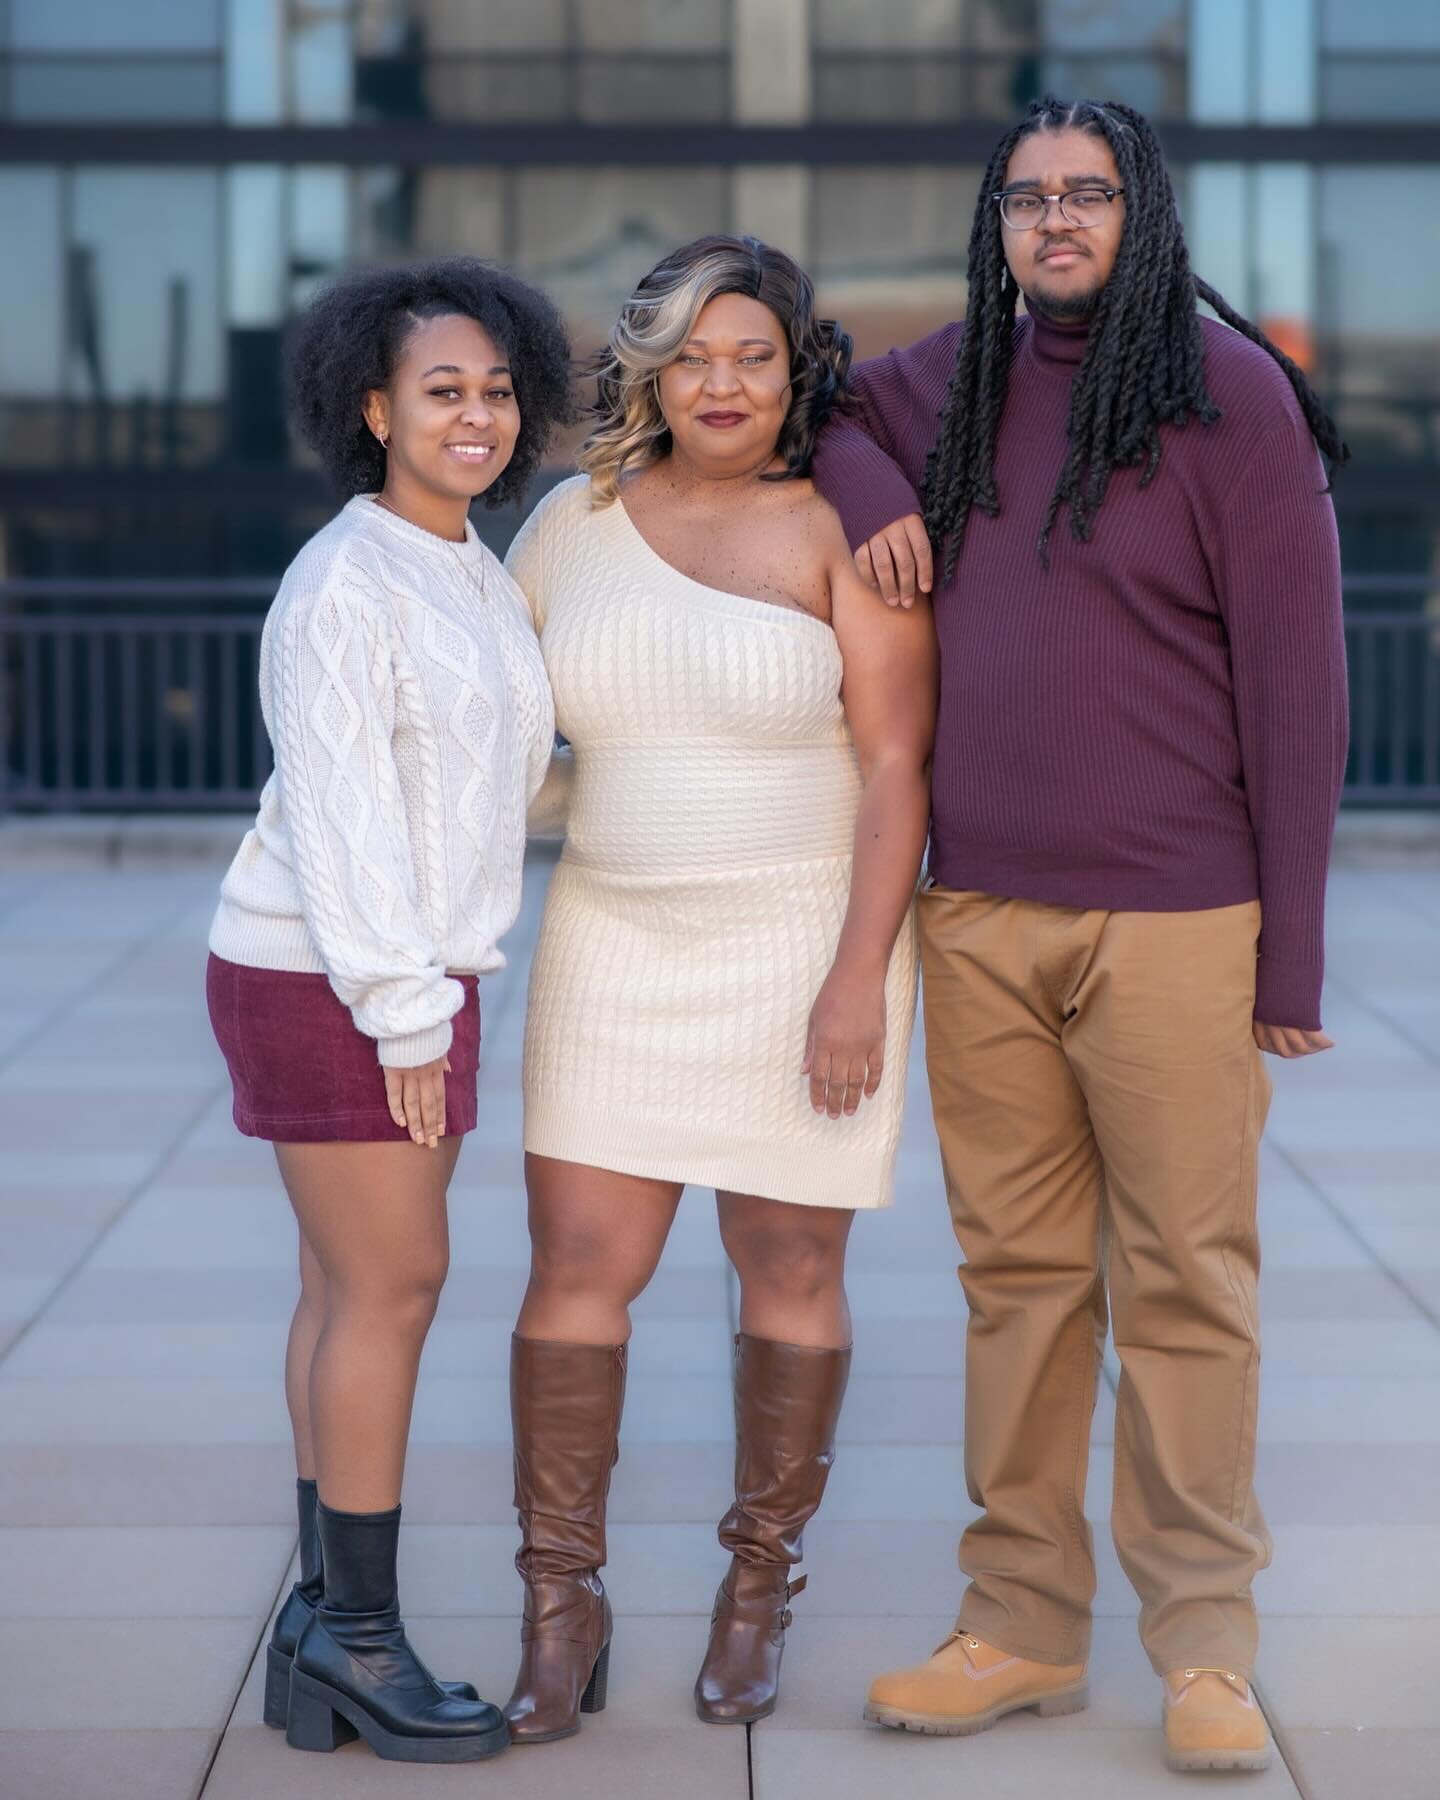 it&rsquo;s always a good time working with this beautiful family. i remember when they were just babies and now they&rsquo;re grown, respectful, hardworking young adults (and they obviously get it from their momma). thanks rokeya for always thinking 